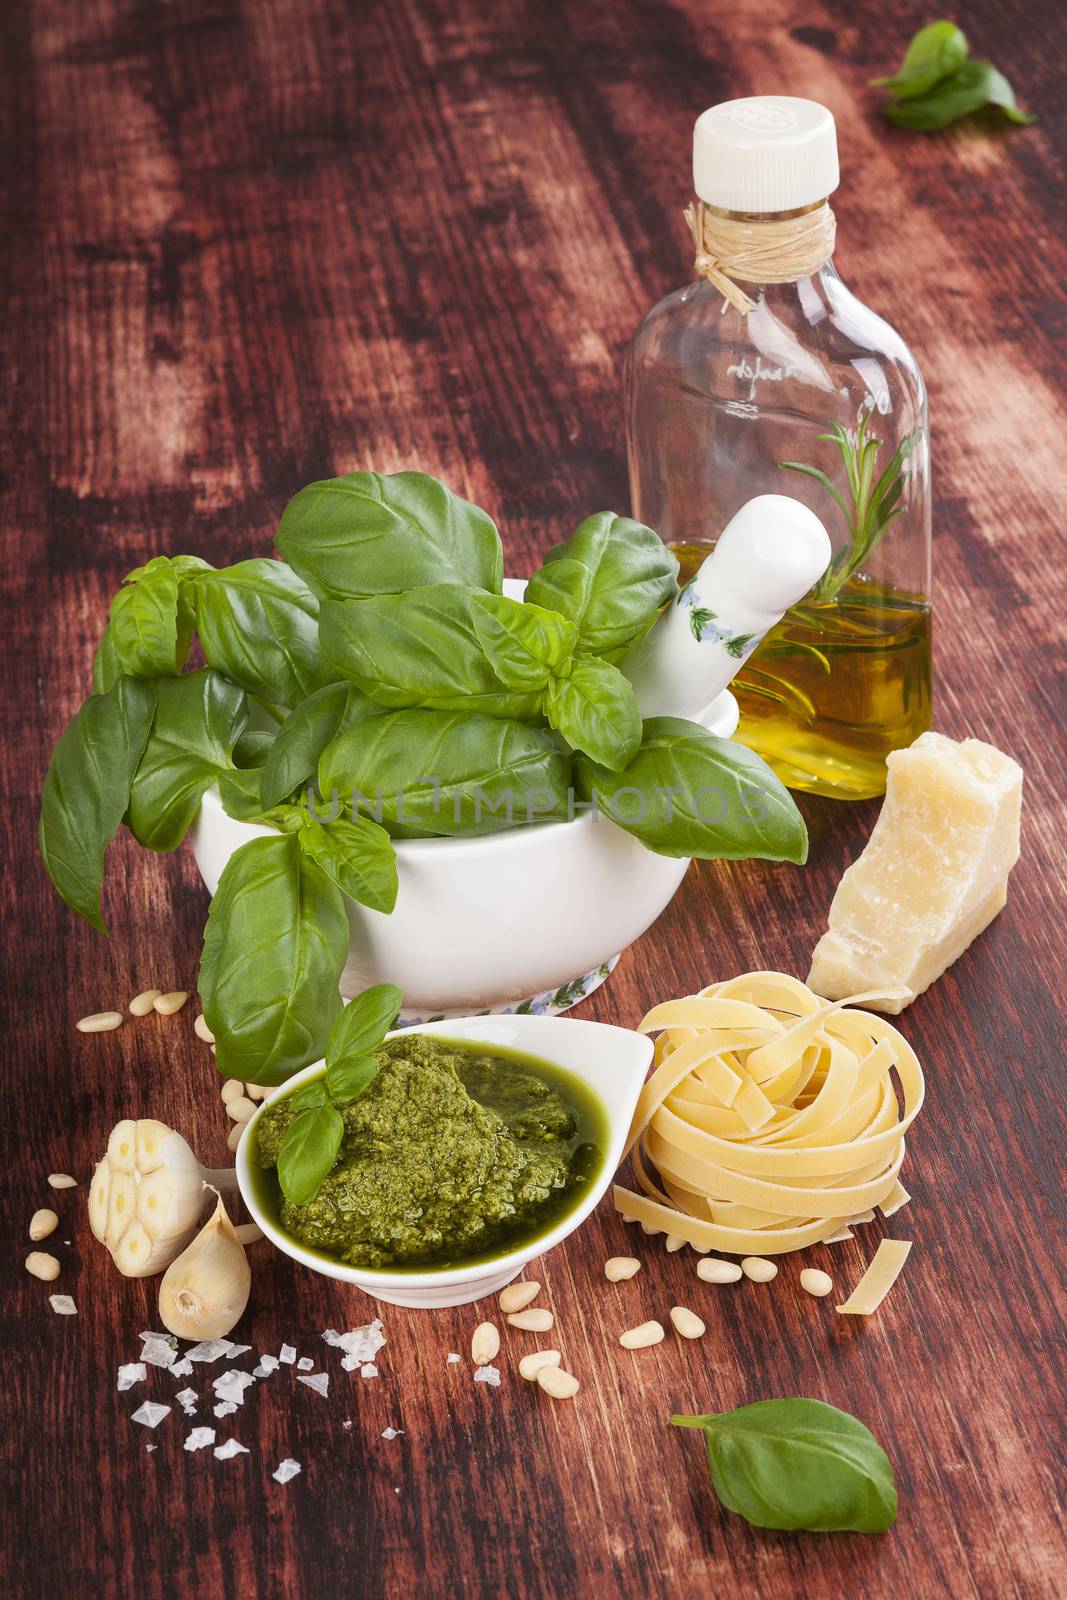 Basil pesto, fresh basil herbs, pasta, olive oil and garlic on wooden background. Italian and mediterranean cuisine ingredients. Healthy culinary eating.